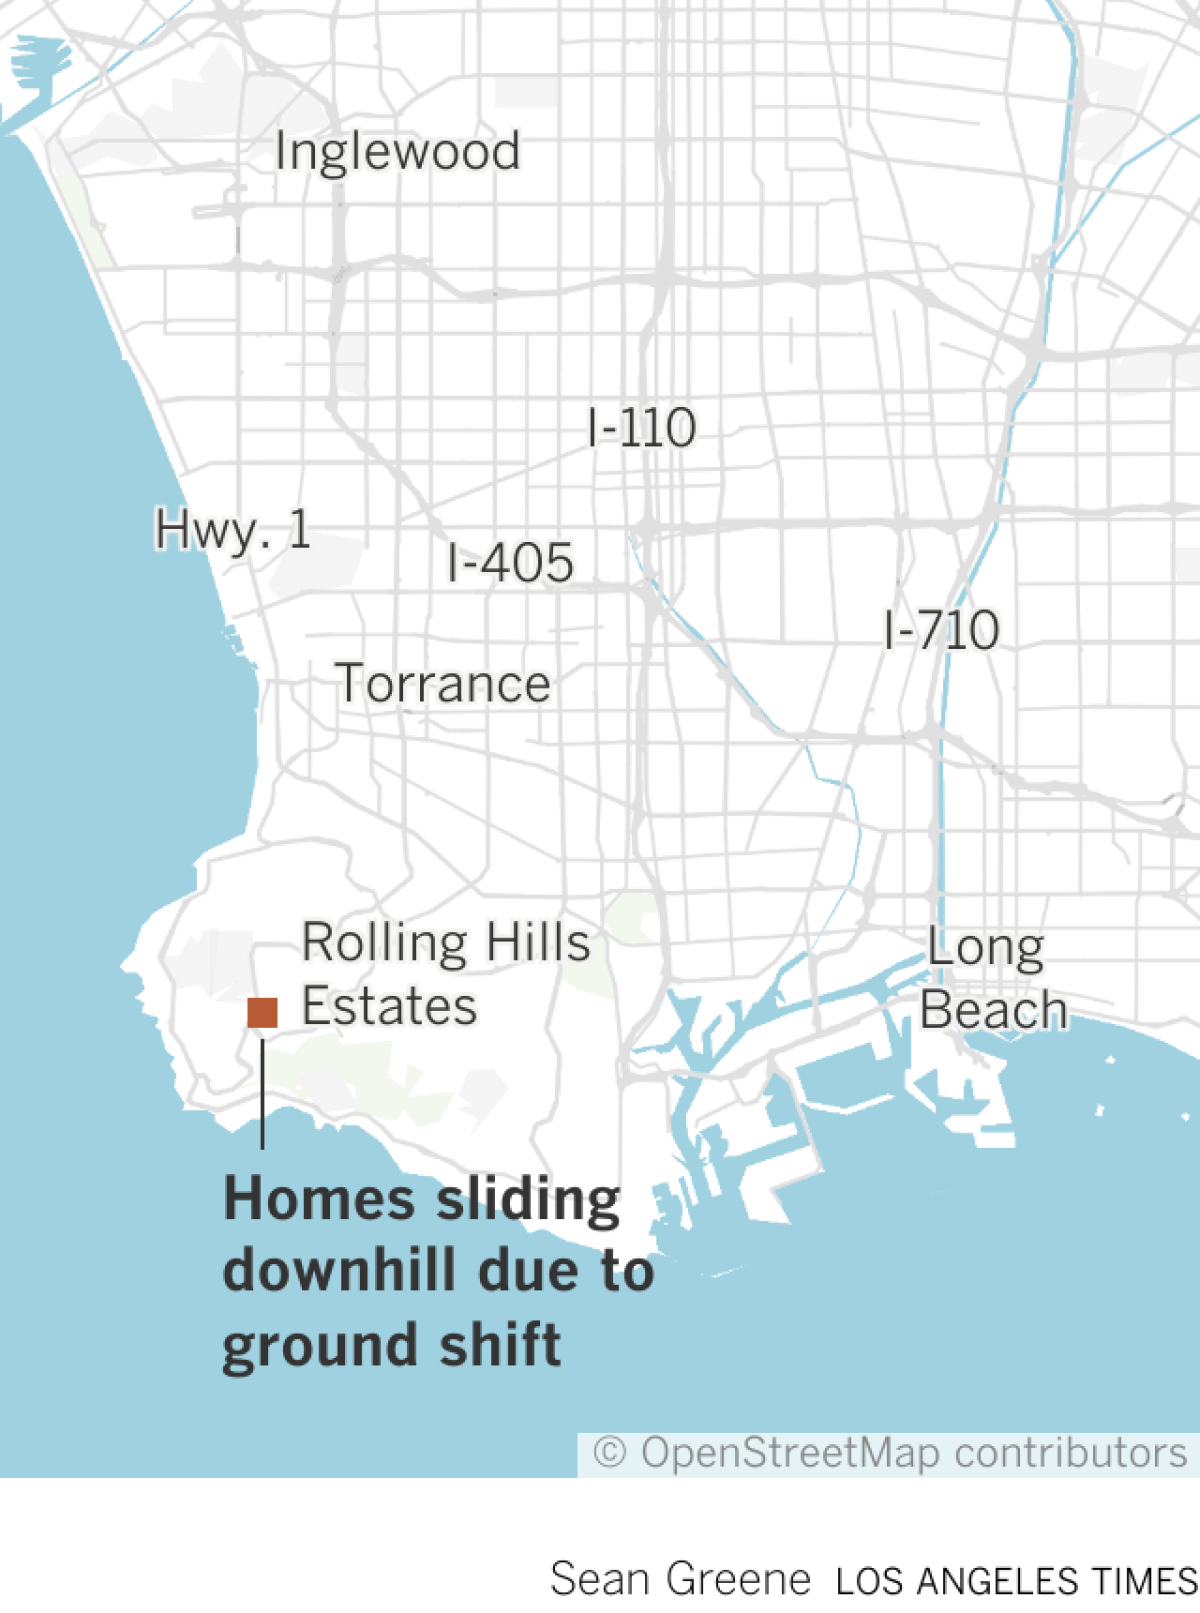 Map showing location of a ground shift that caused homes in Rancho Palos Verdes to slide downhill